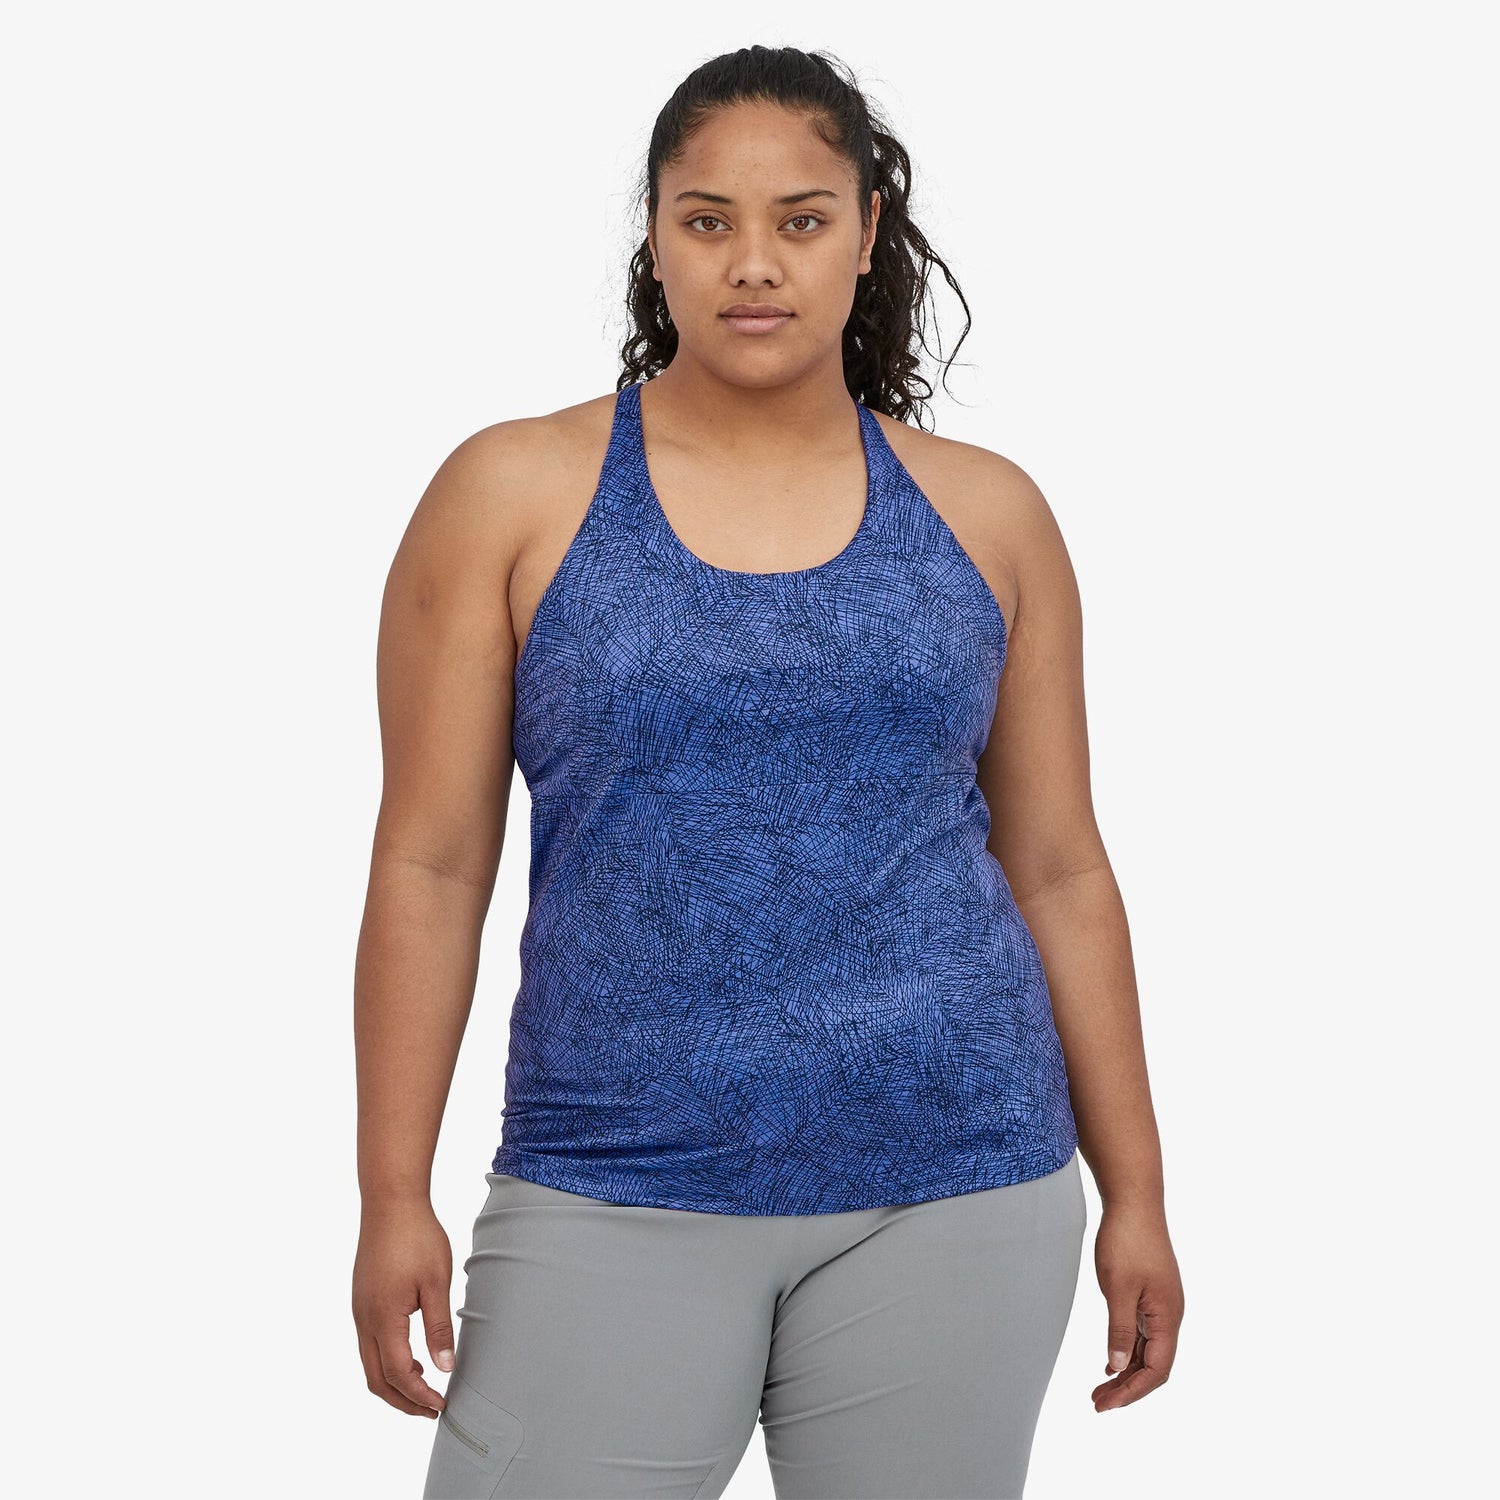 Patagonia - W's Mibra Tank Top - Recycled Polyester - Weekendbee - sustainable sportswear